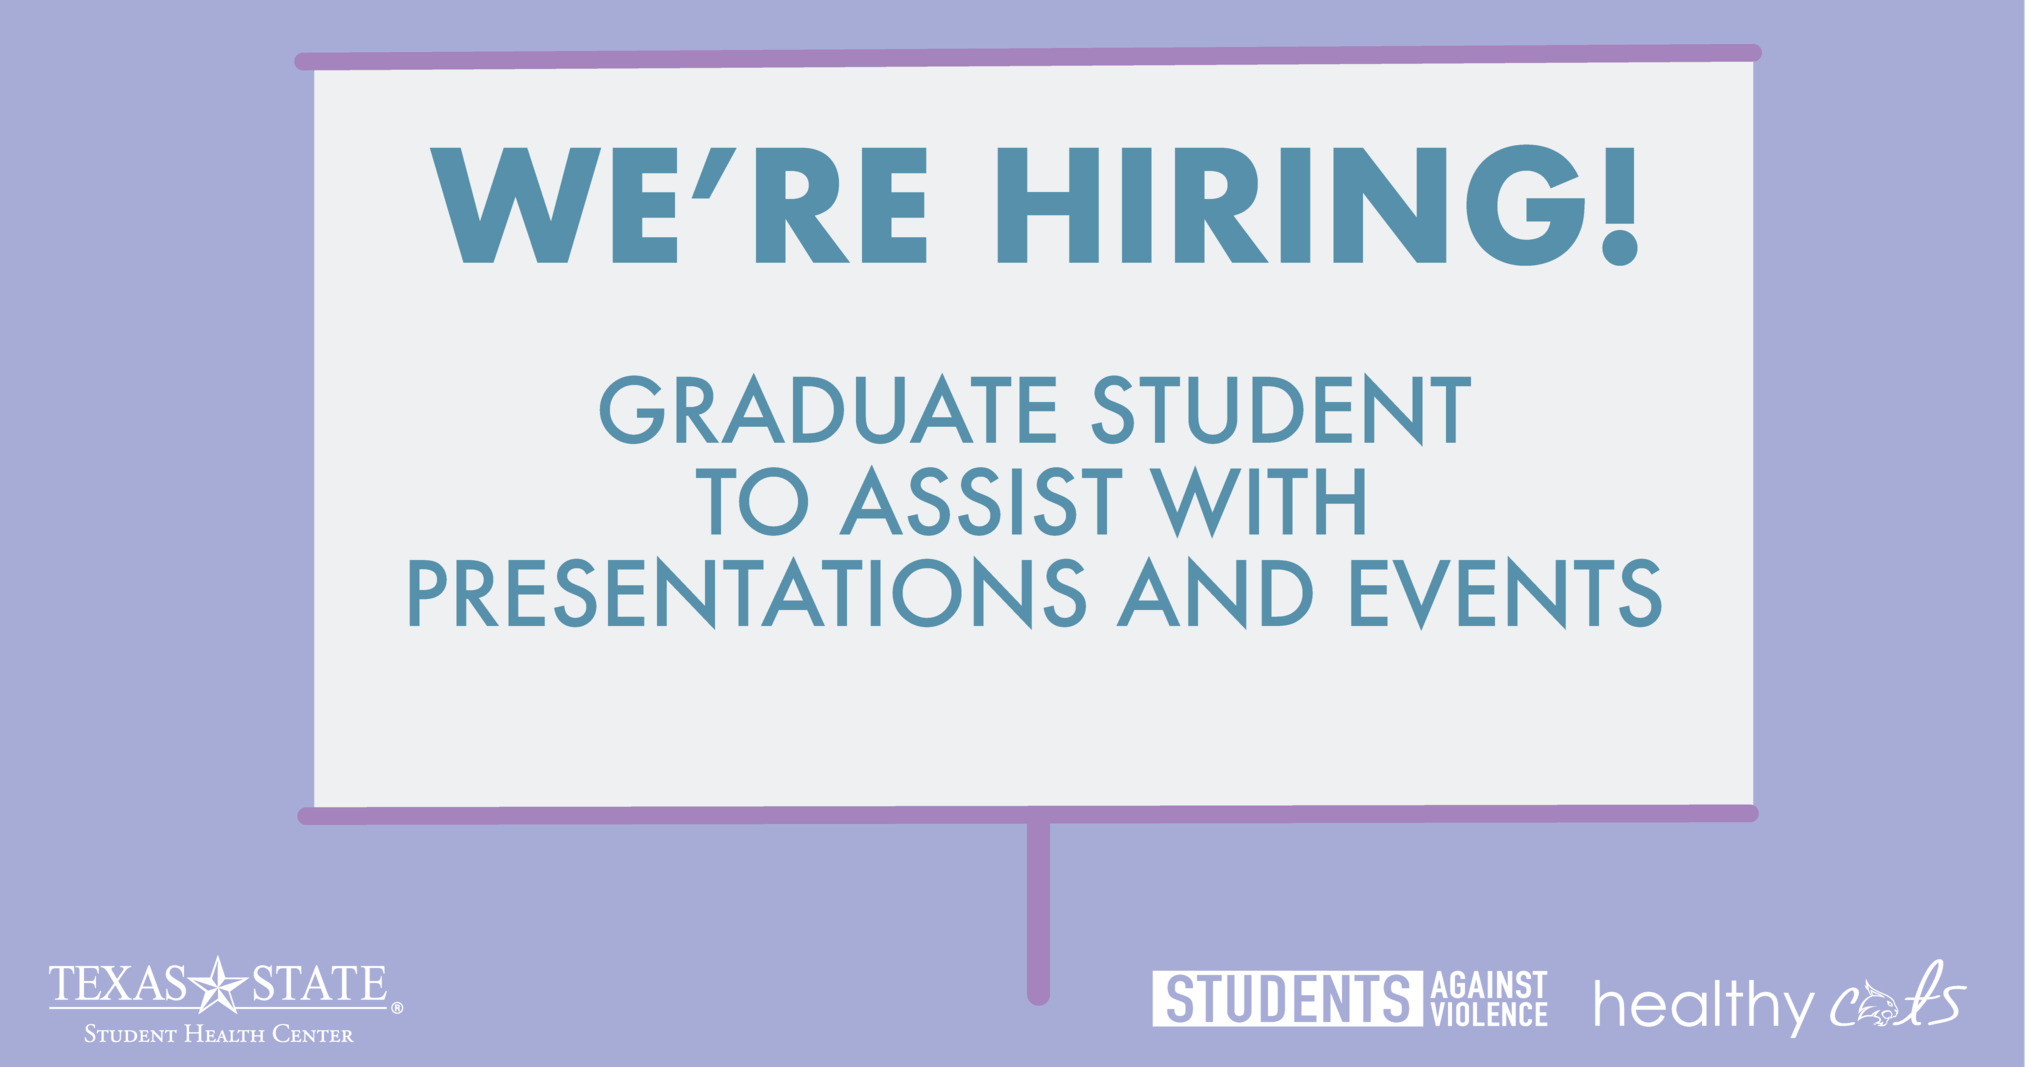 "We're Hiring! Graduate Student to Assist with Presenting"